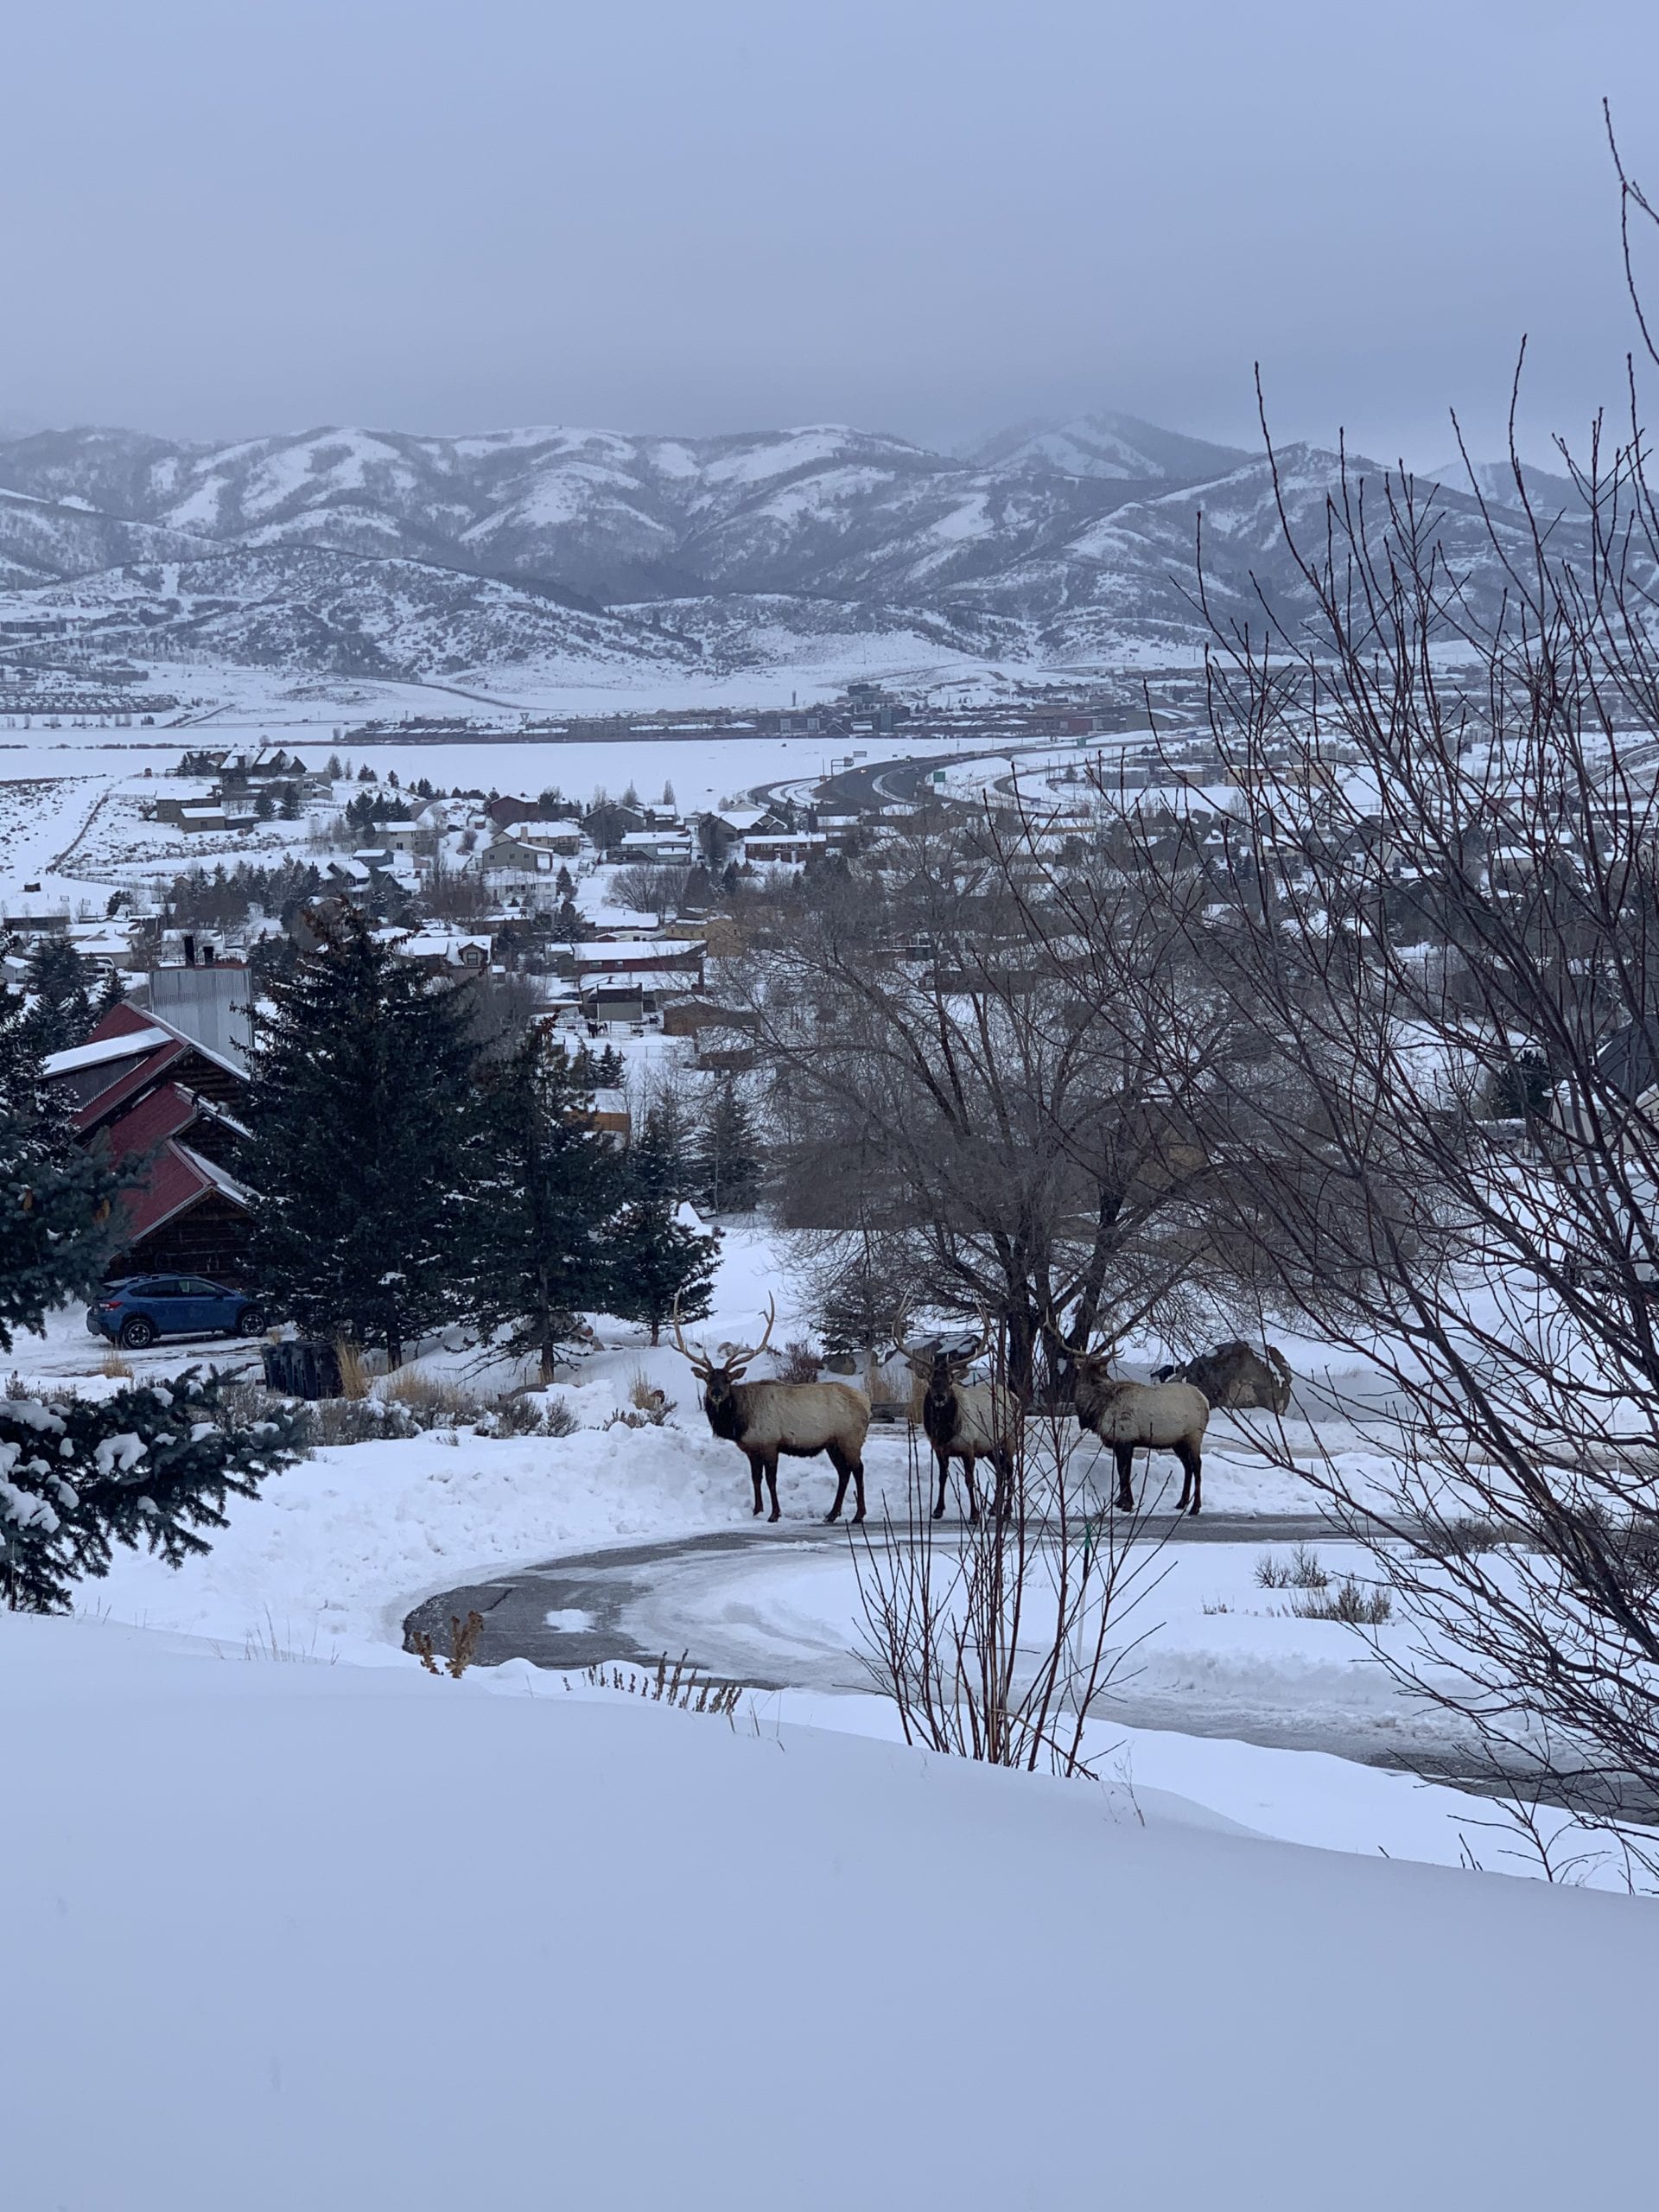 A few elk making an appearance in the Highland Estates area of the Trailside neighborhood.